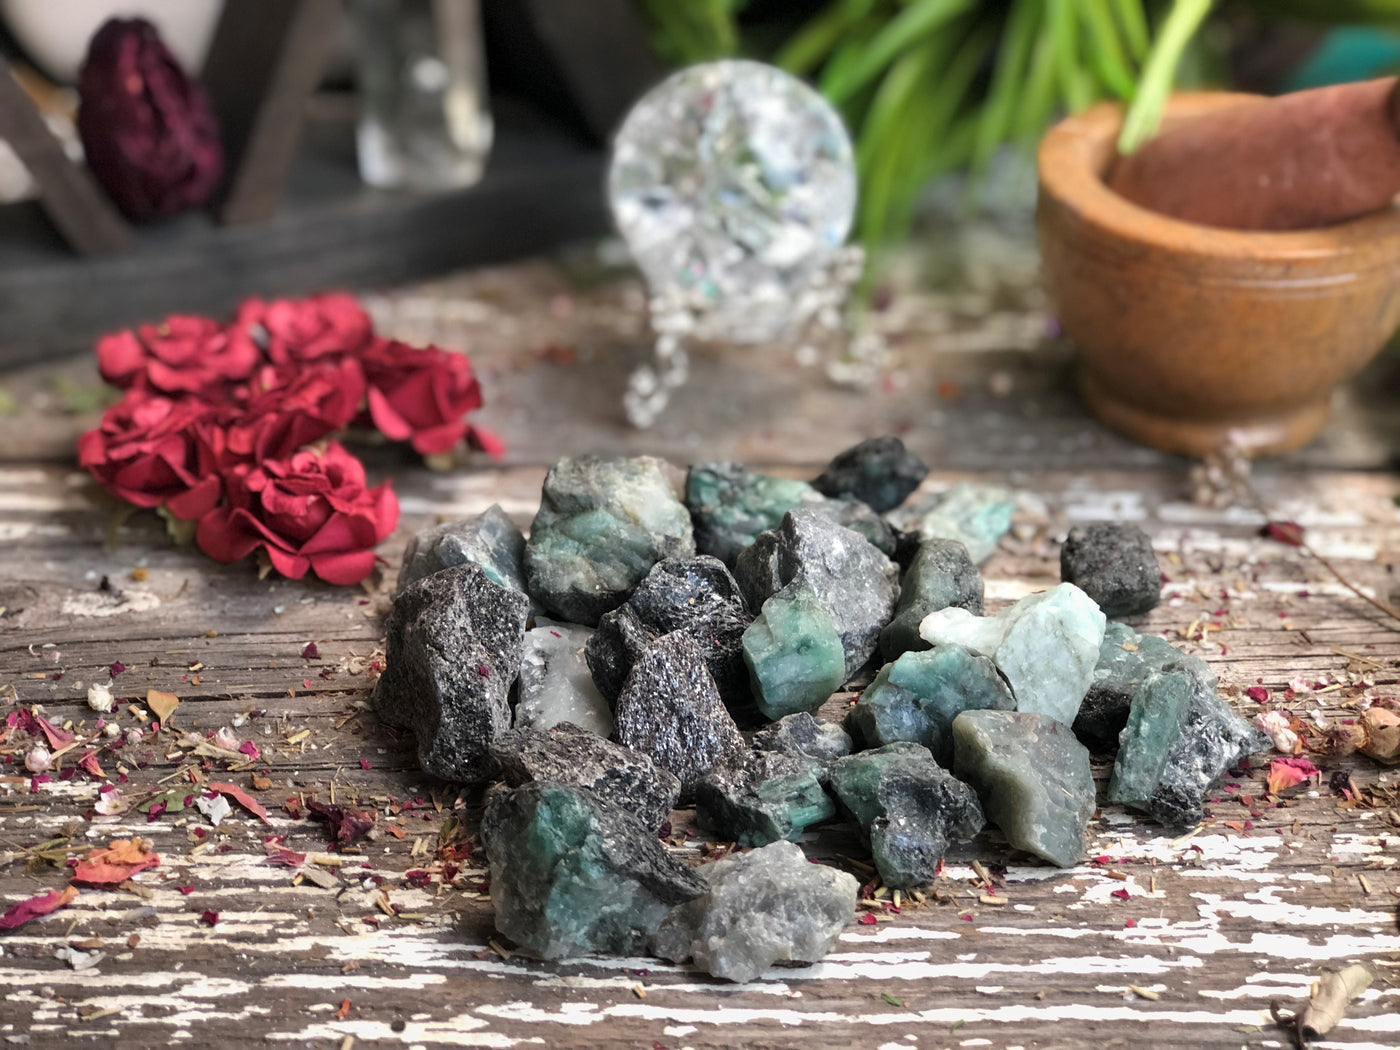 A handful of rough Emerald pieces laid out